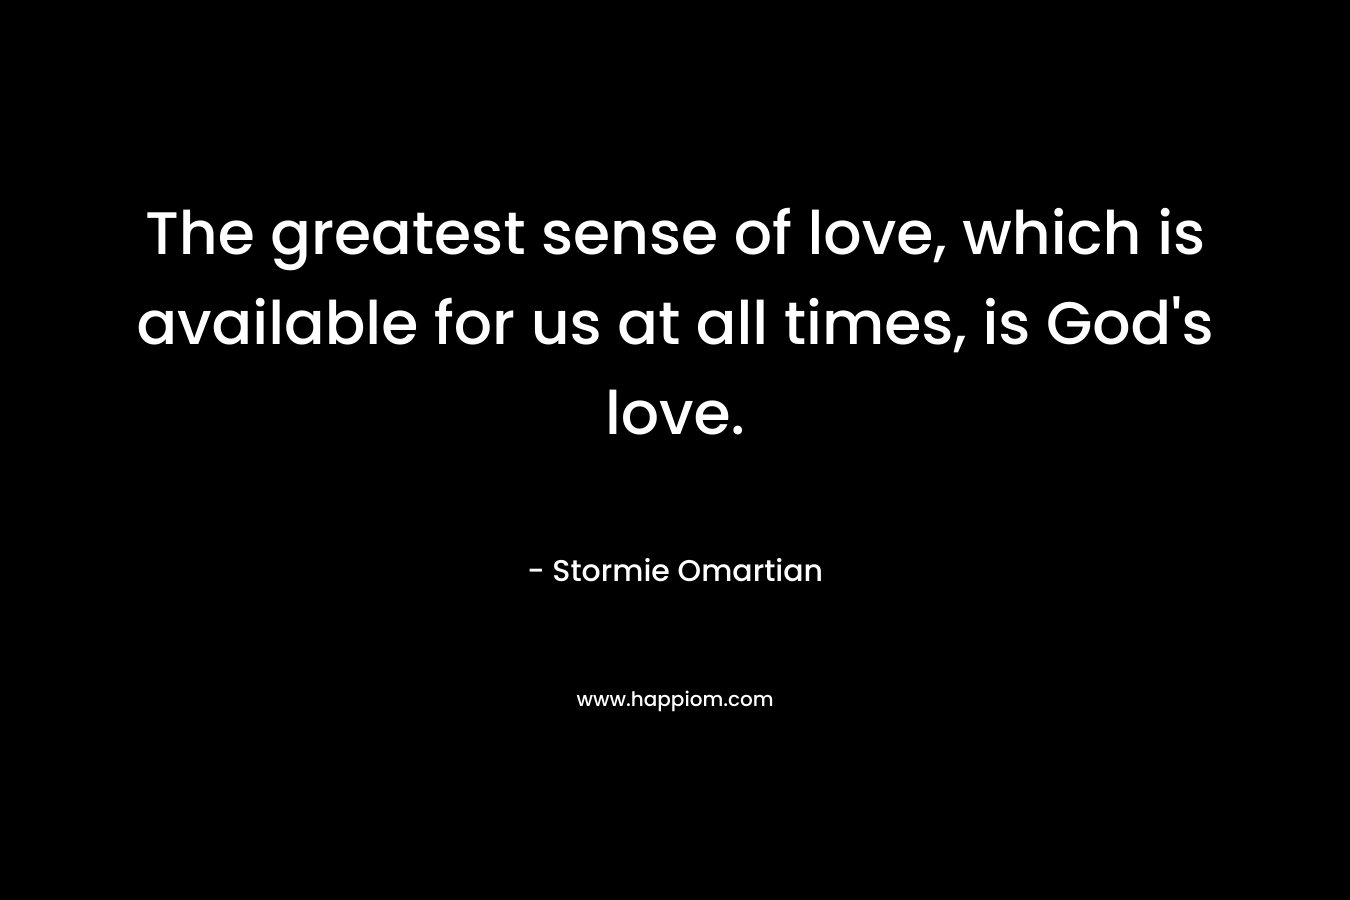 The greatest sense of love, which is available for us at all times, is God’s love. – Stormie Omartian